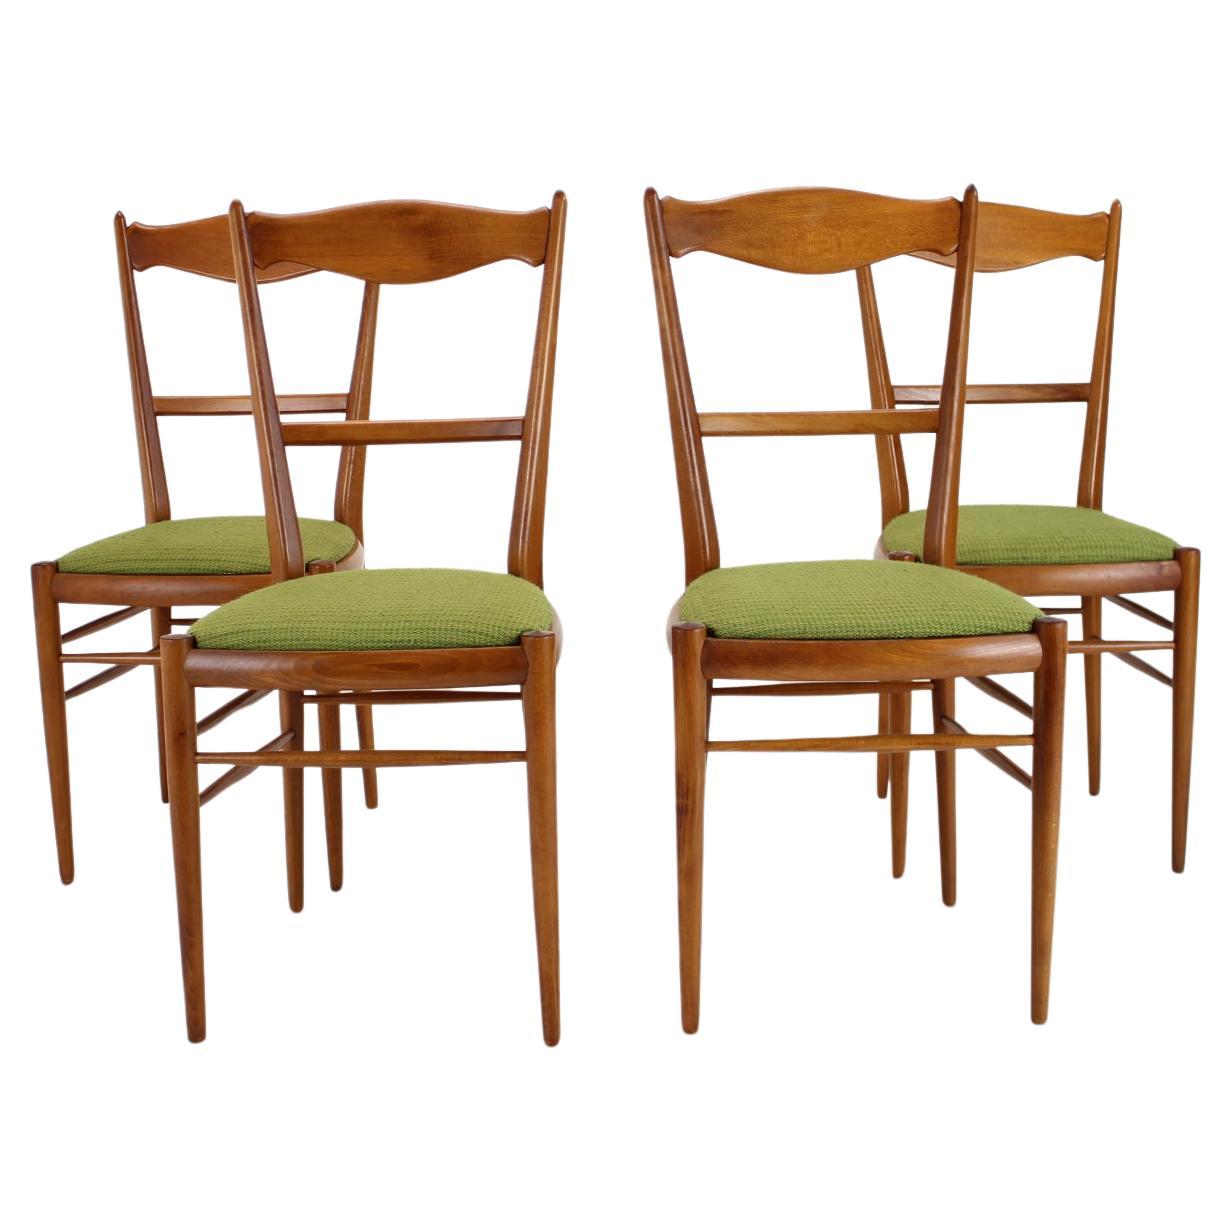 1970s Set of 4 Dining Chairs by Drevotvar, Czechoslovakia For Sale